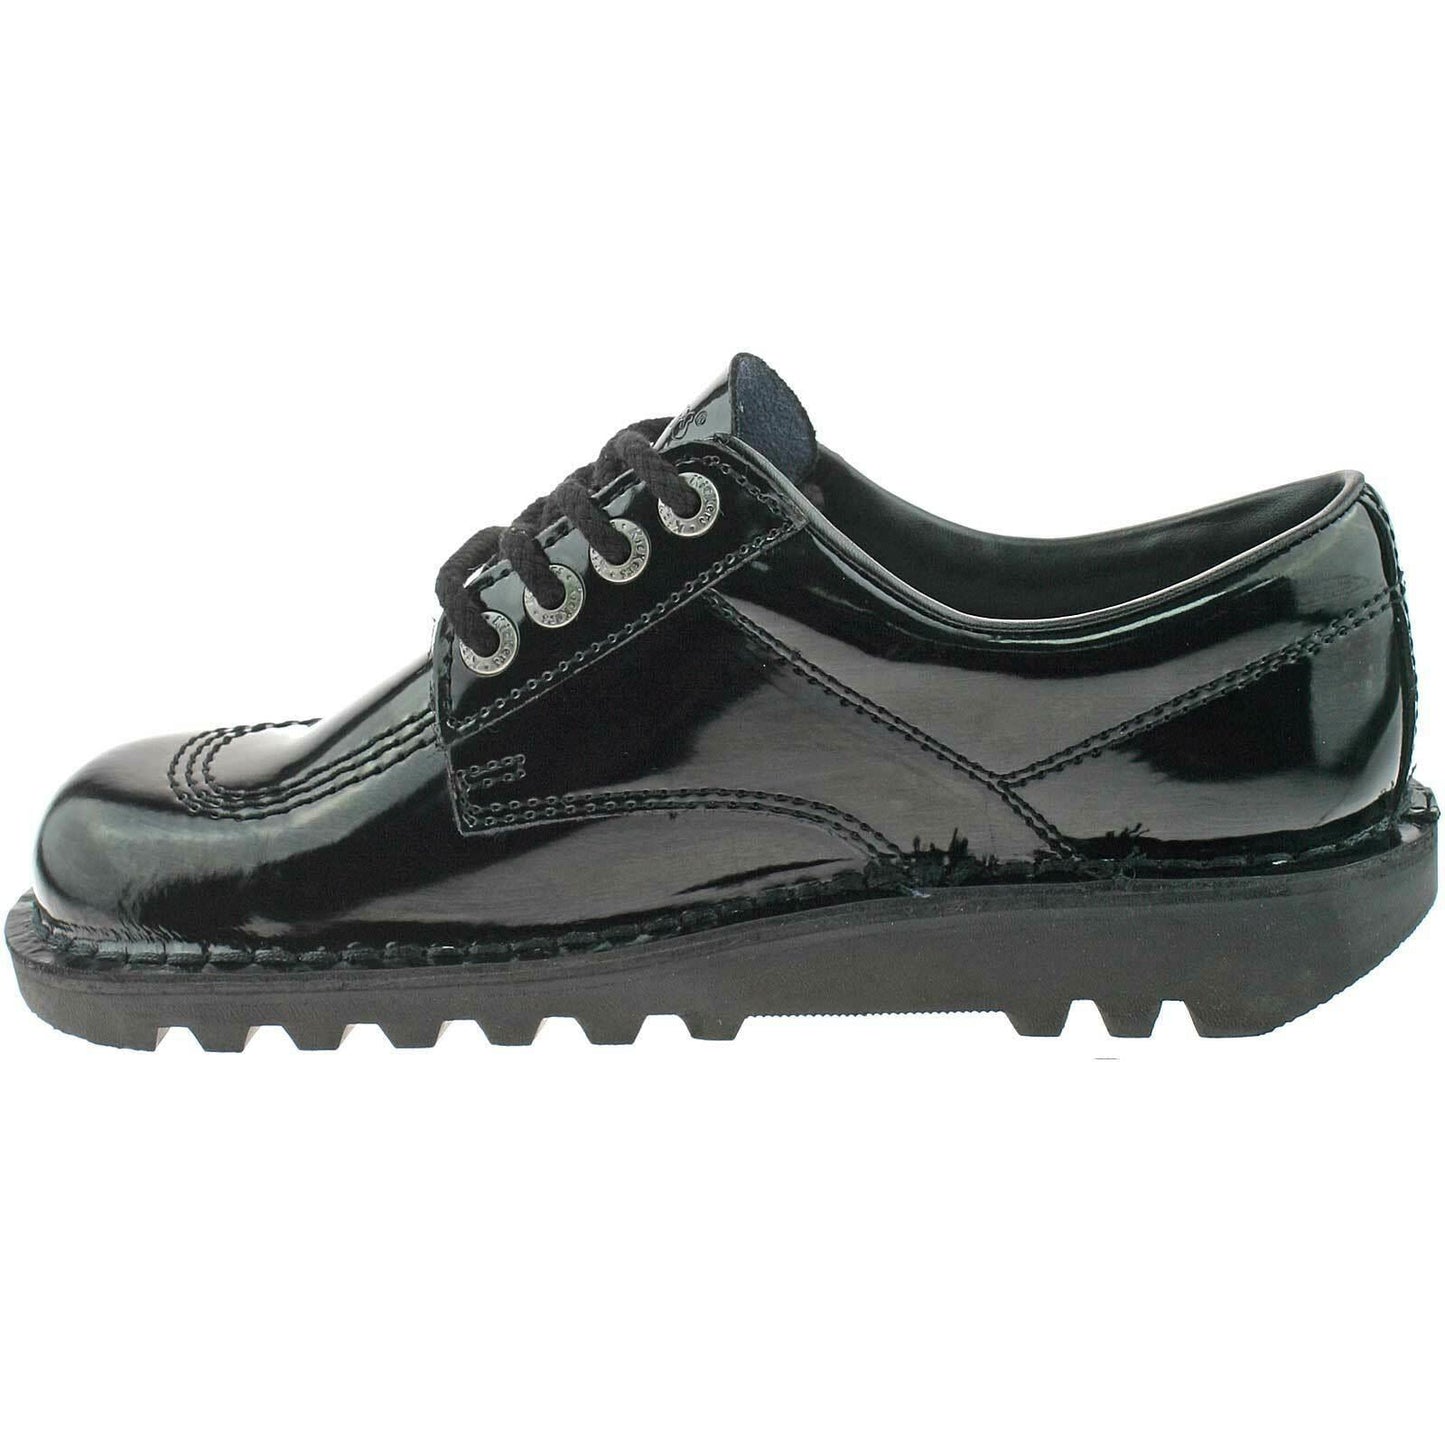 Womens Kickers Kick Lo Black Patent Leather Lace Up School Shoes 1-10688